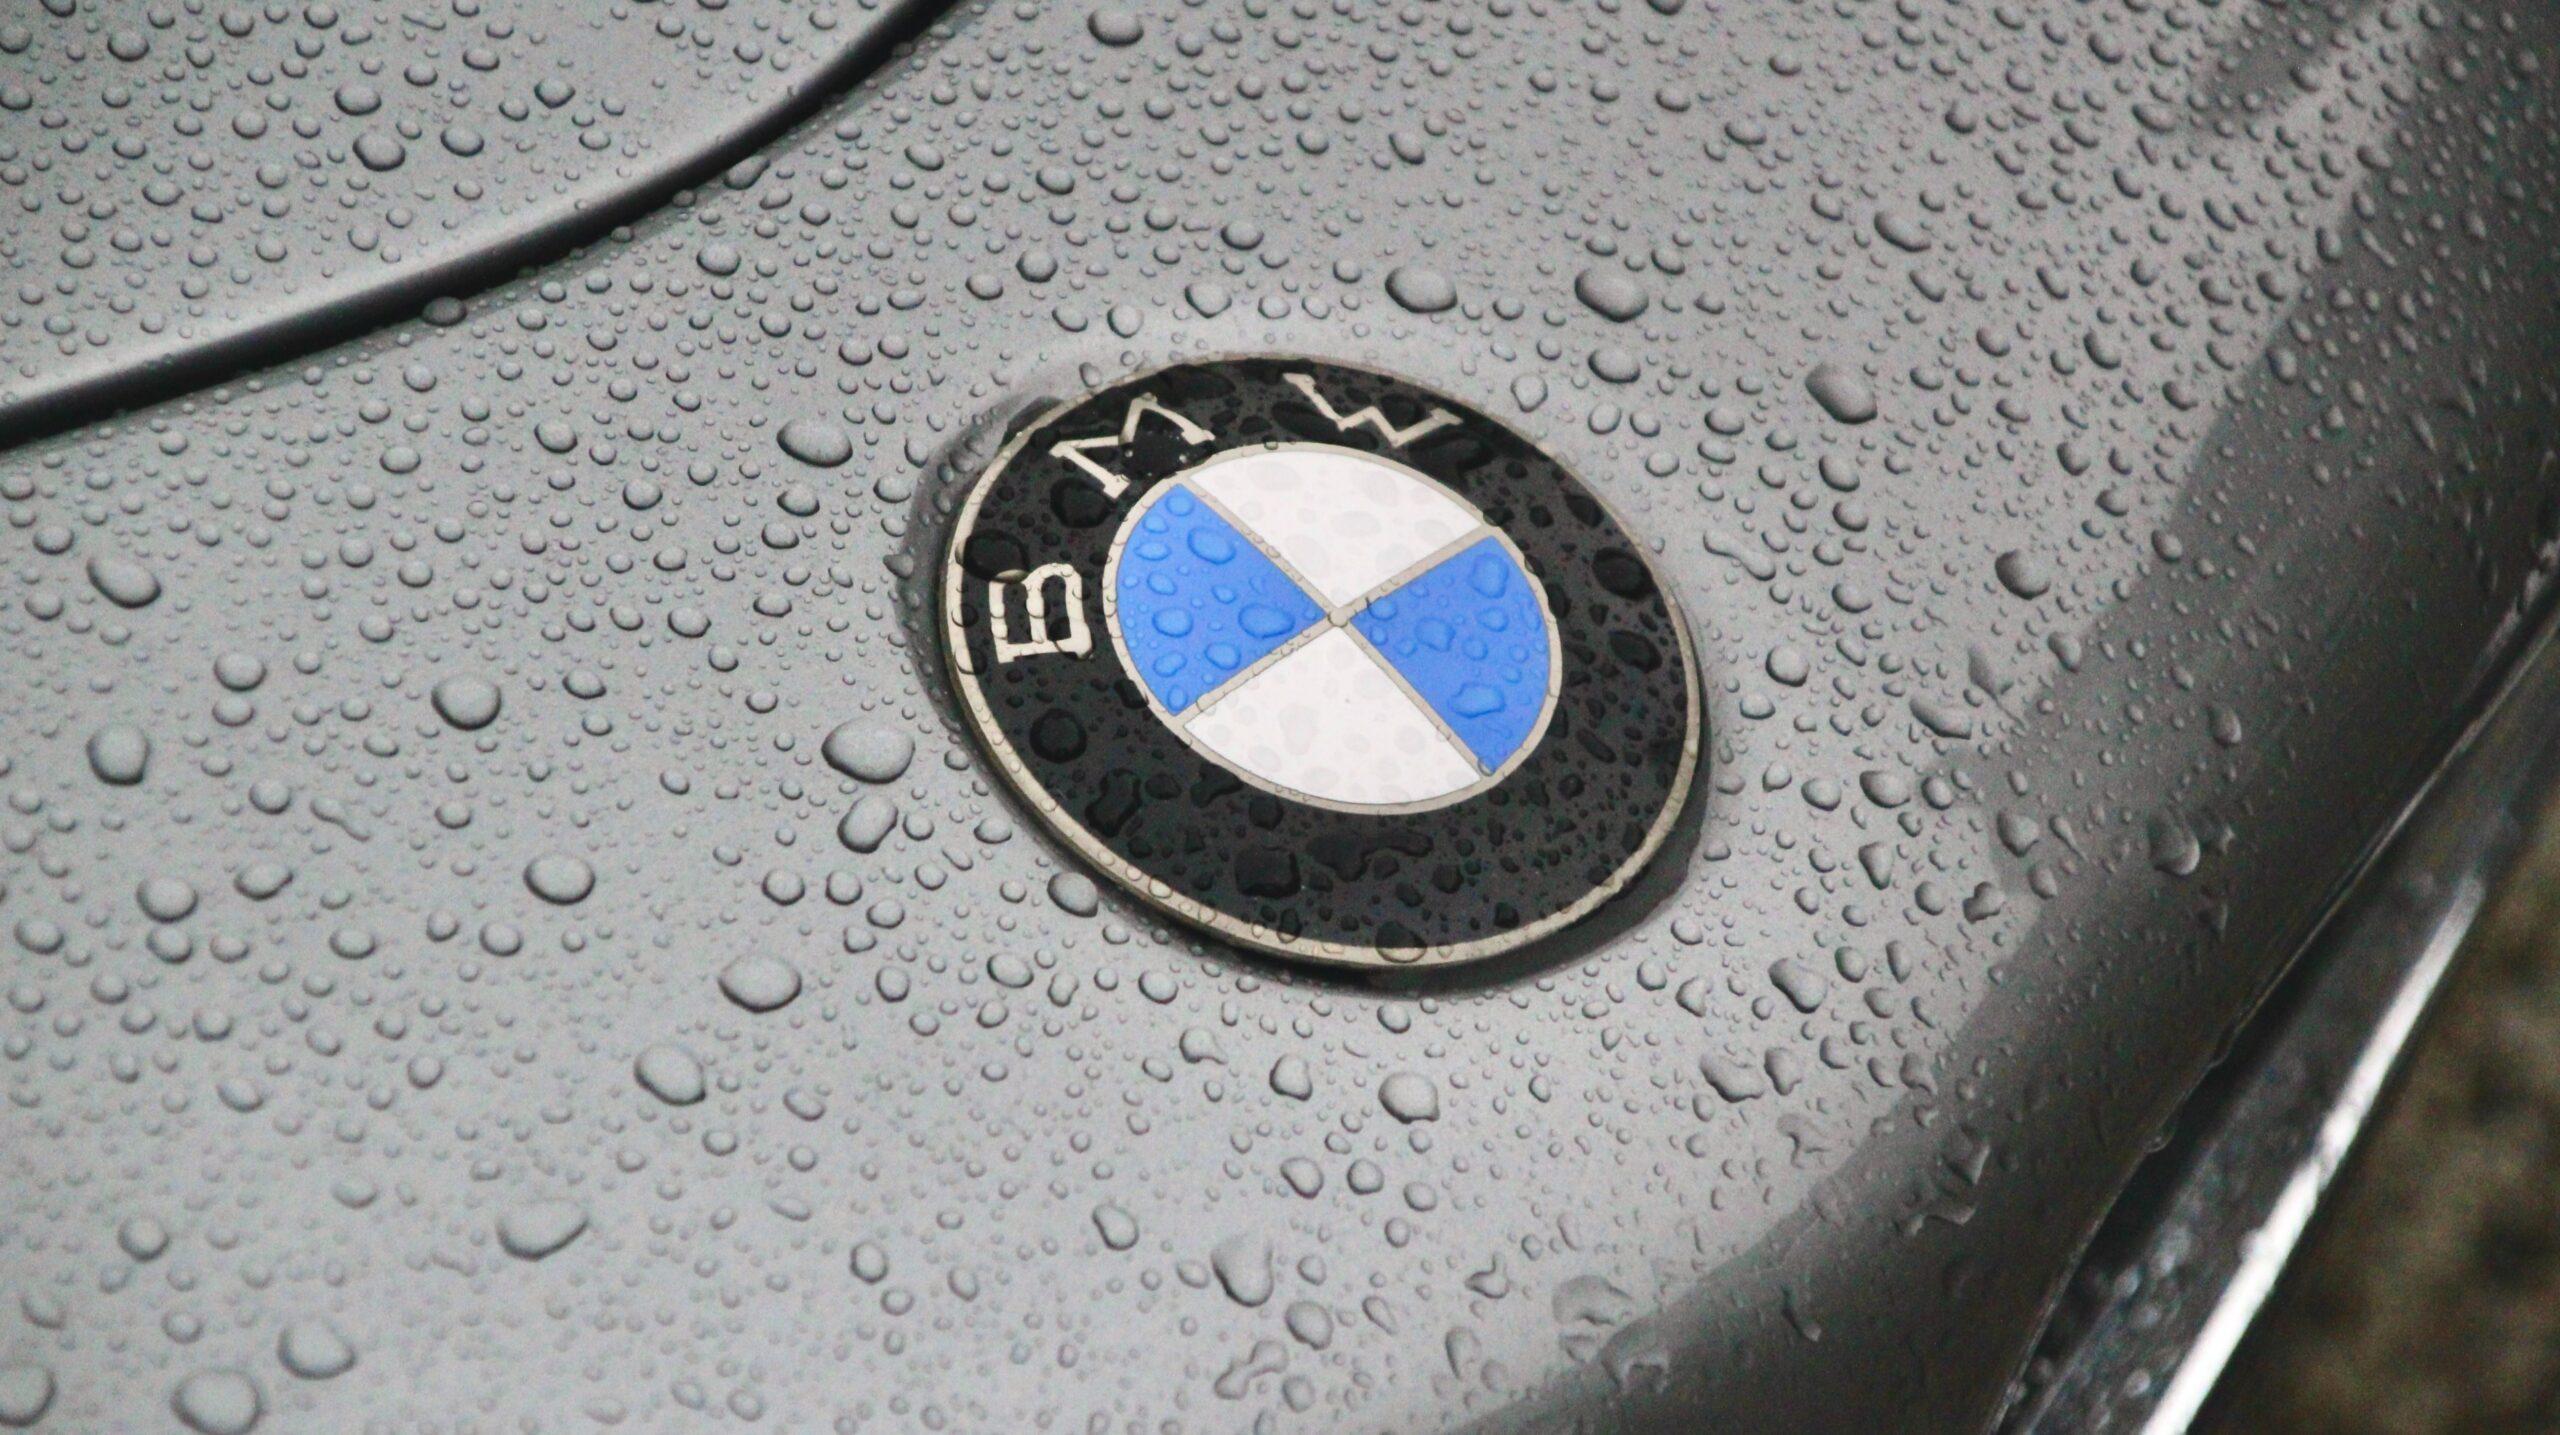 Close up of a BMW vehicle showing the brand's logo.